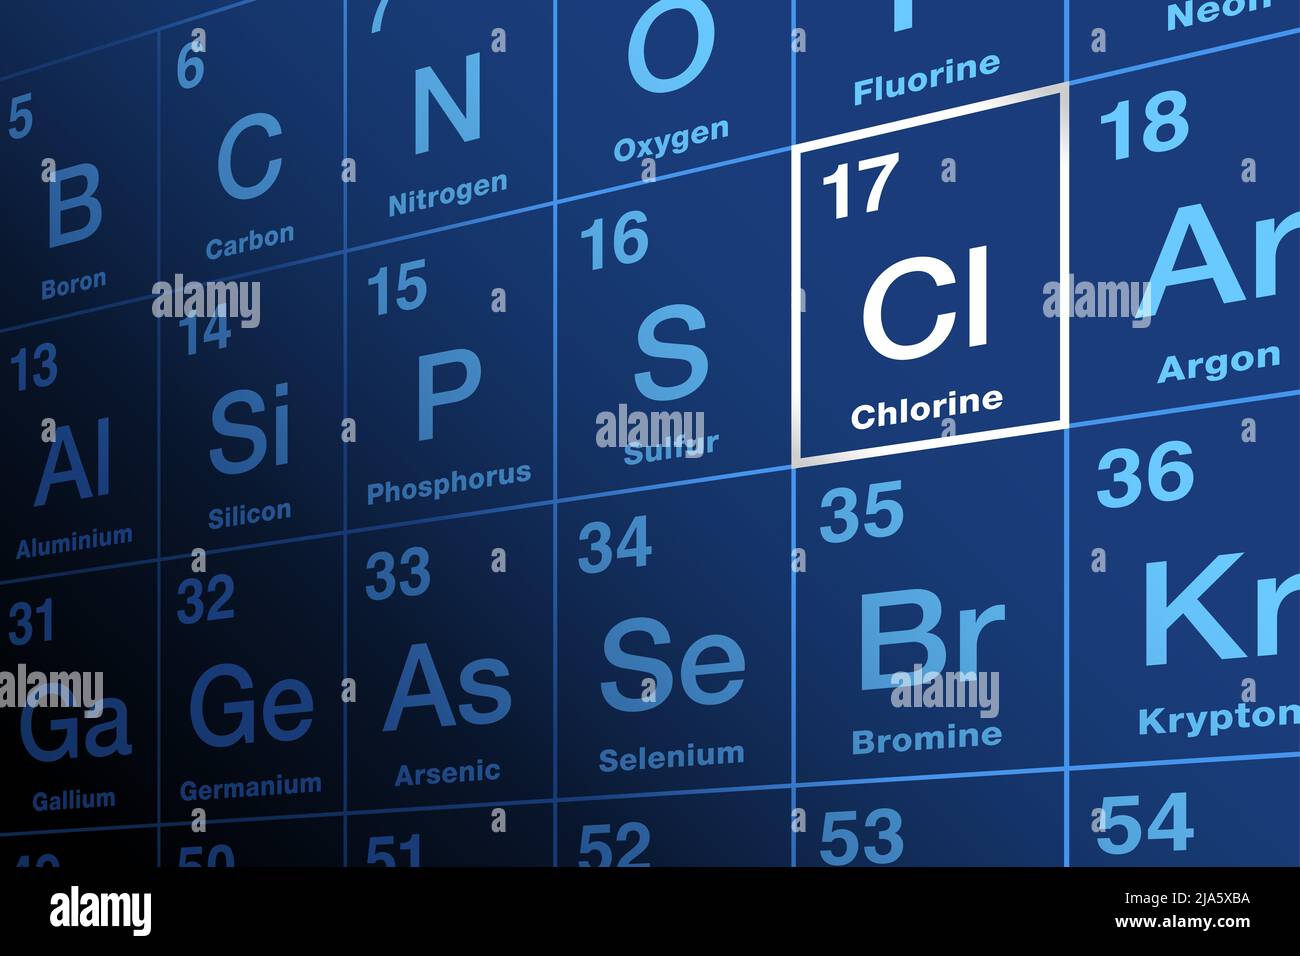 Chlorine on periodic table of the elements. Chemical element and halogen with symbol Cl and atomic number 17. Stock Photo